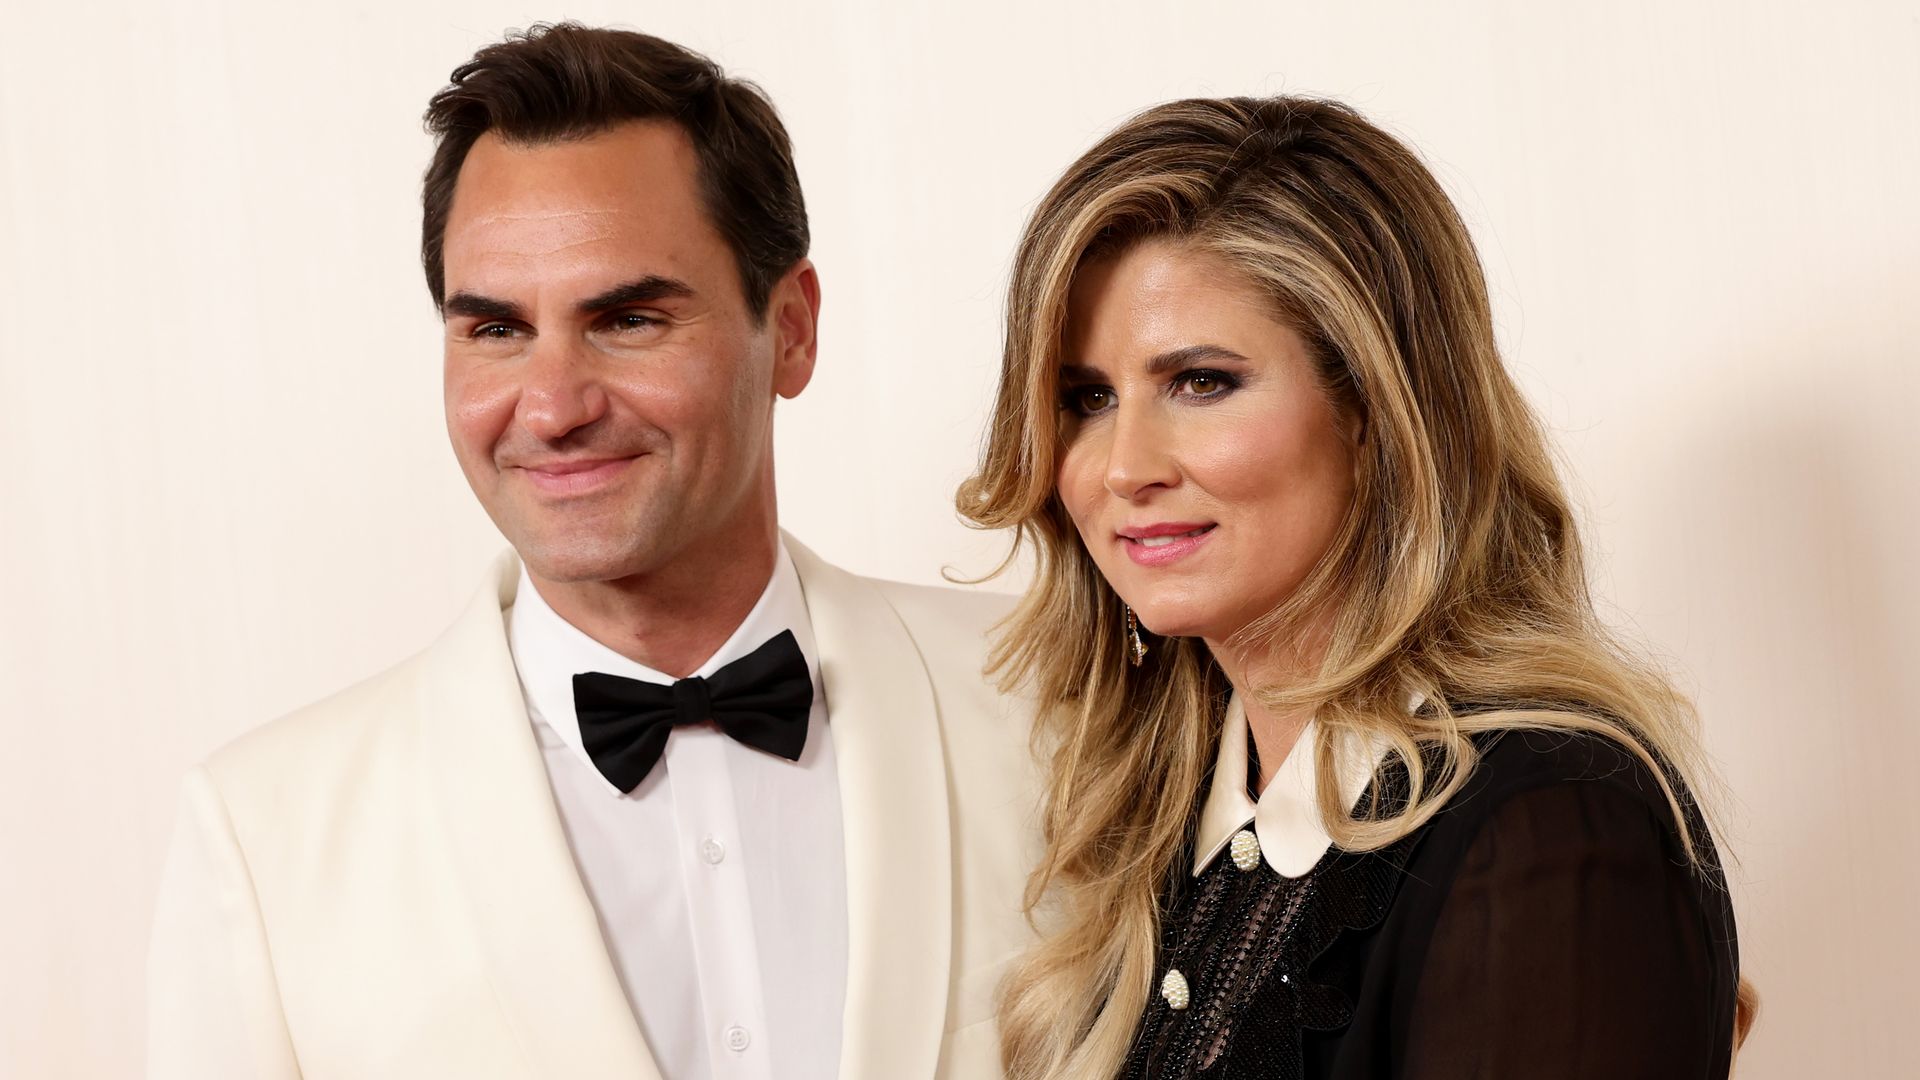 Roger Federer opens up about his 'incredible' wife; 'She taught me what discipline is'